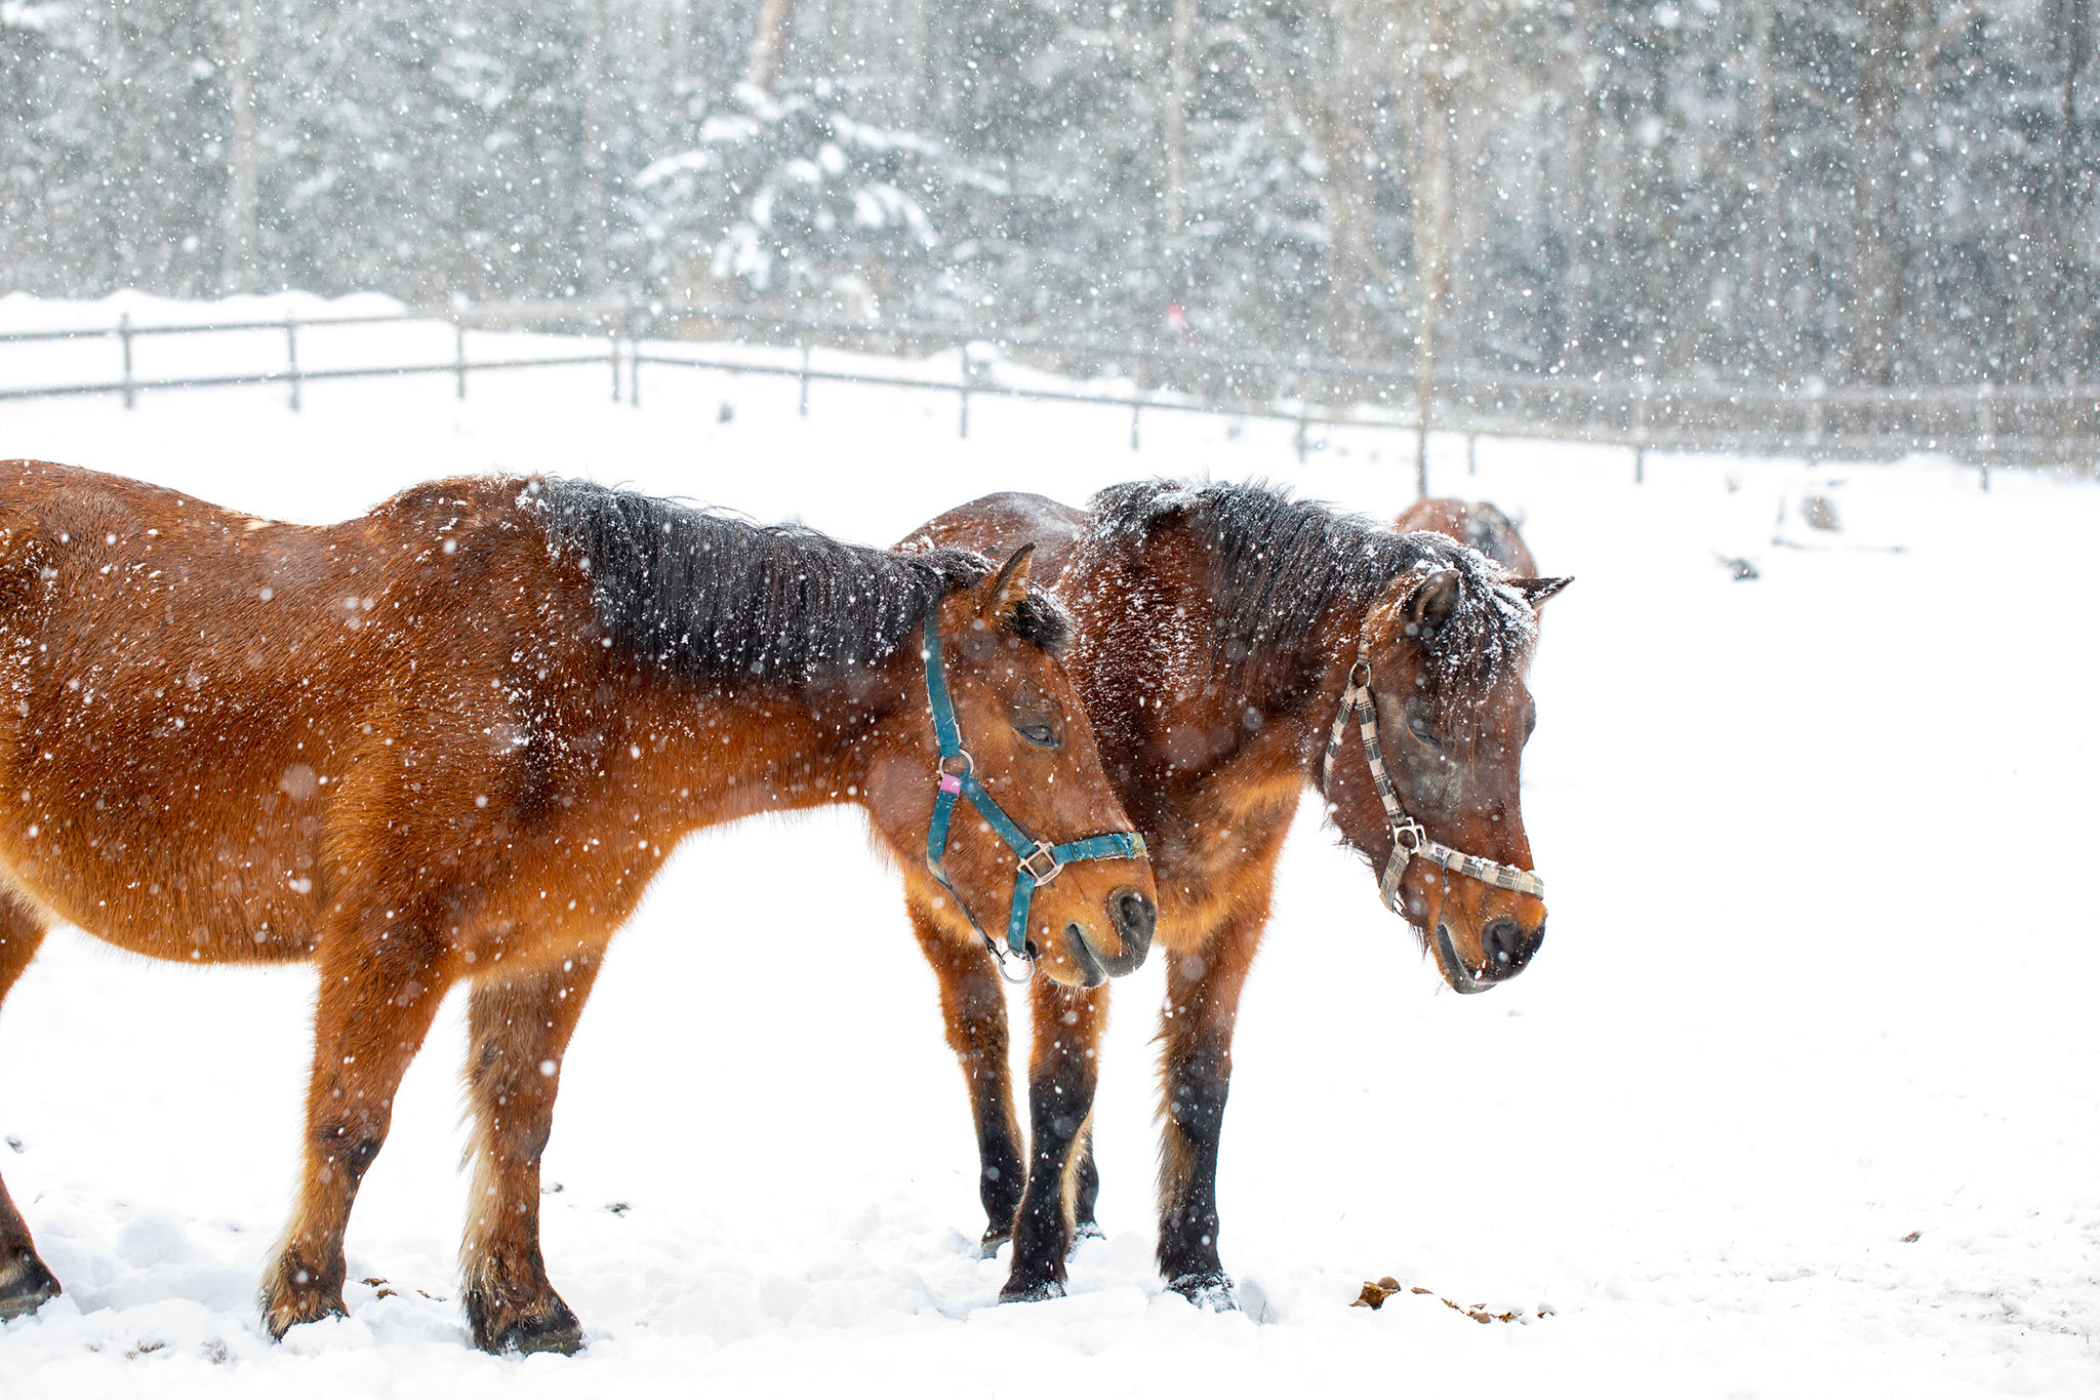 Horses with their heads down in snow during a deep freeze in the midwest.